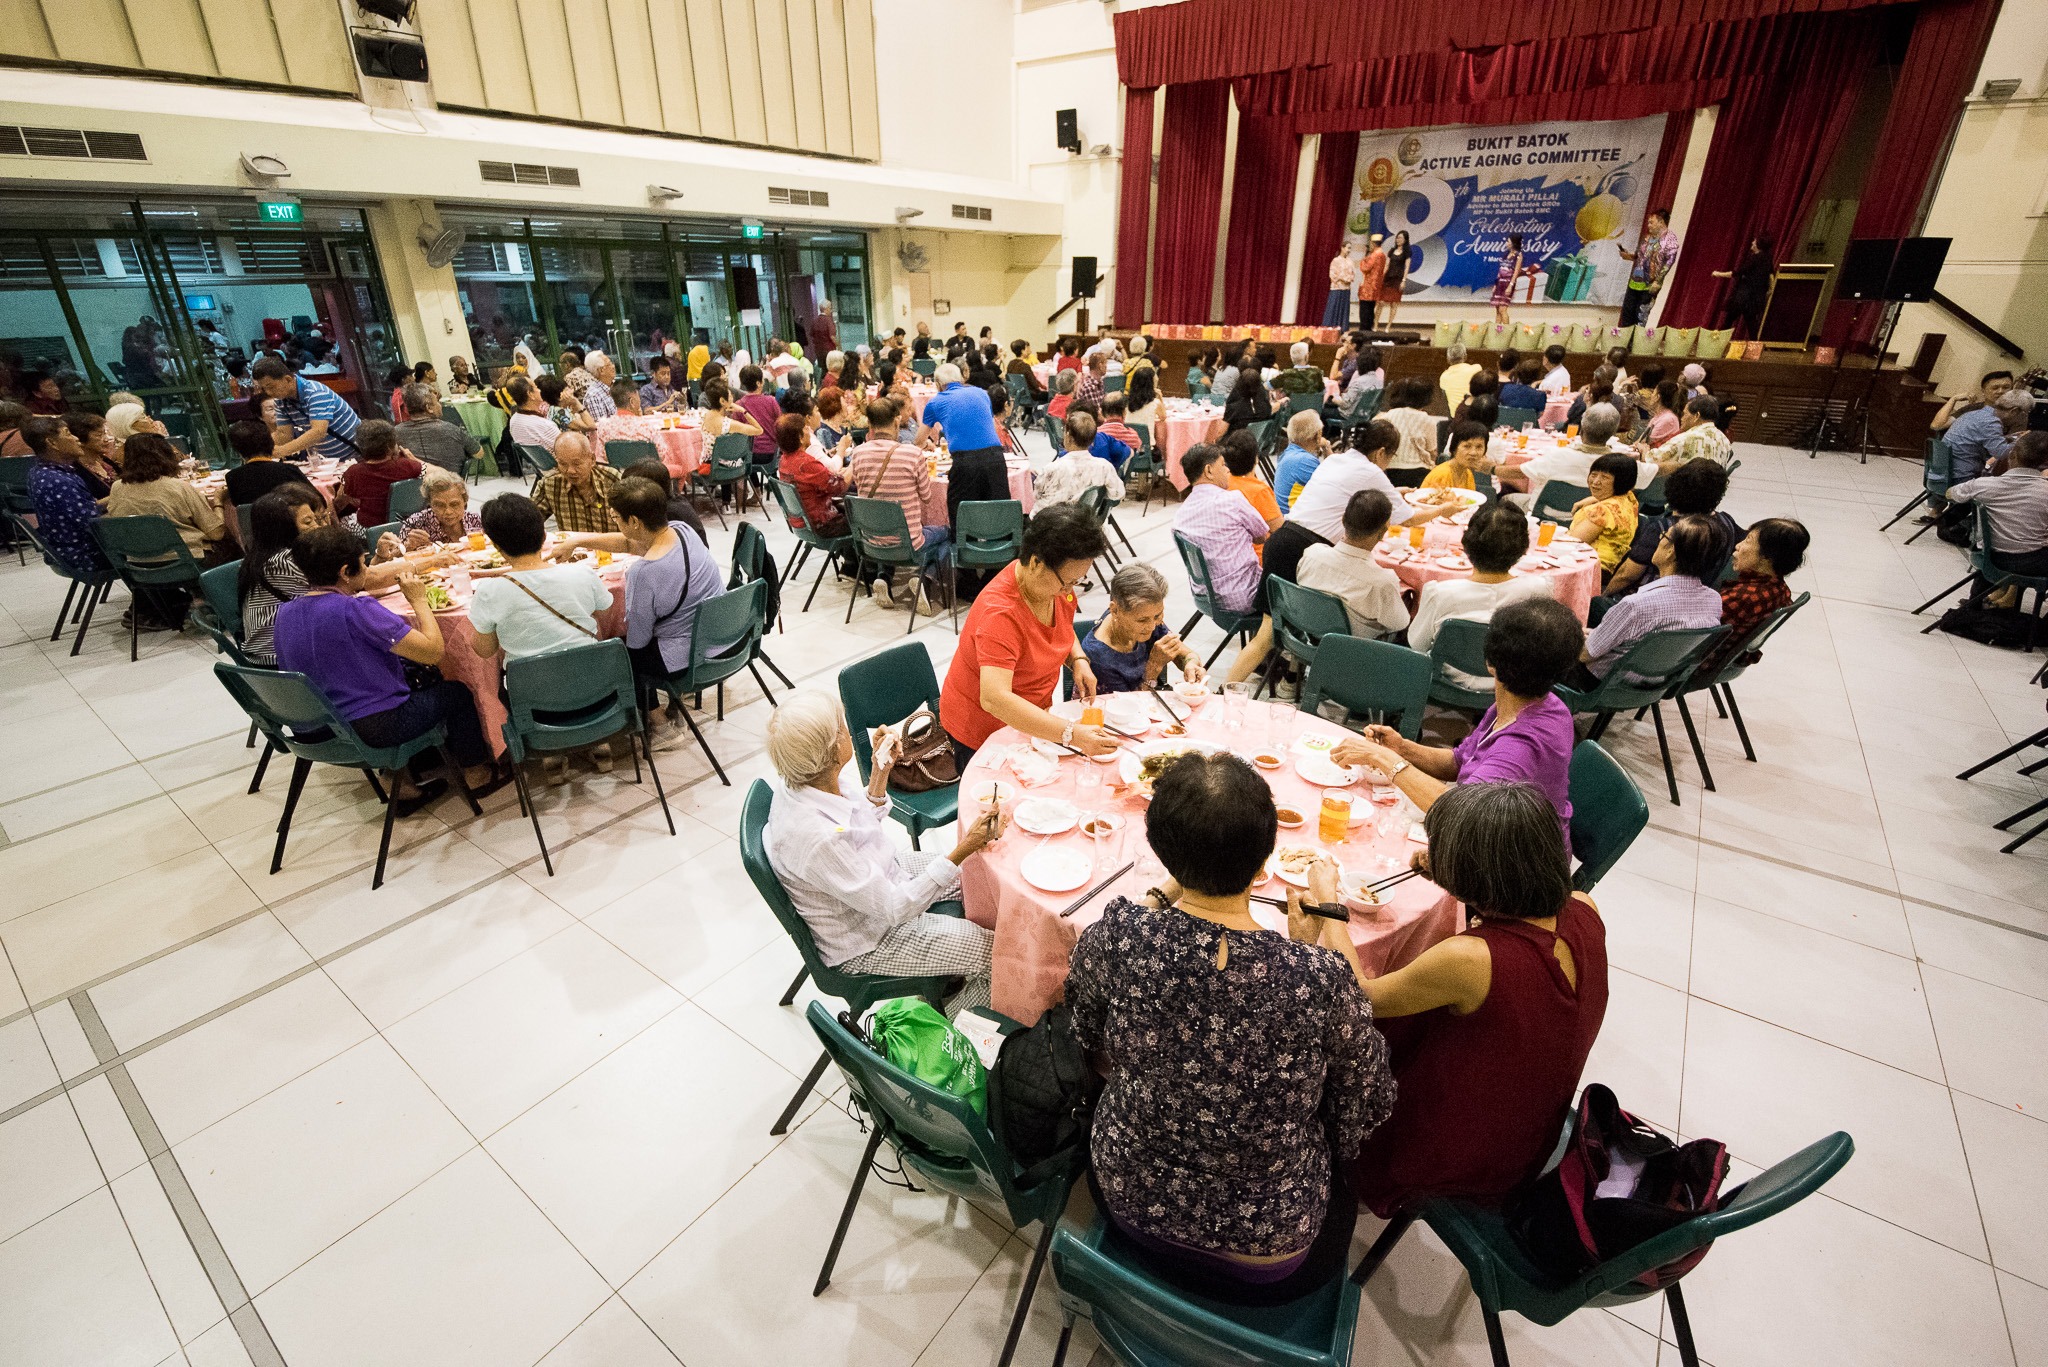 Senior citizens at the eighth anniversary dinner organised by the Active Ageing Committee of Bukit Batok CC